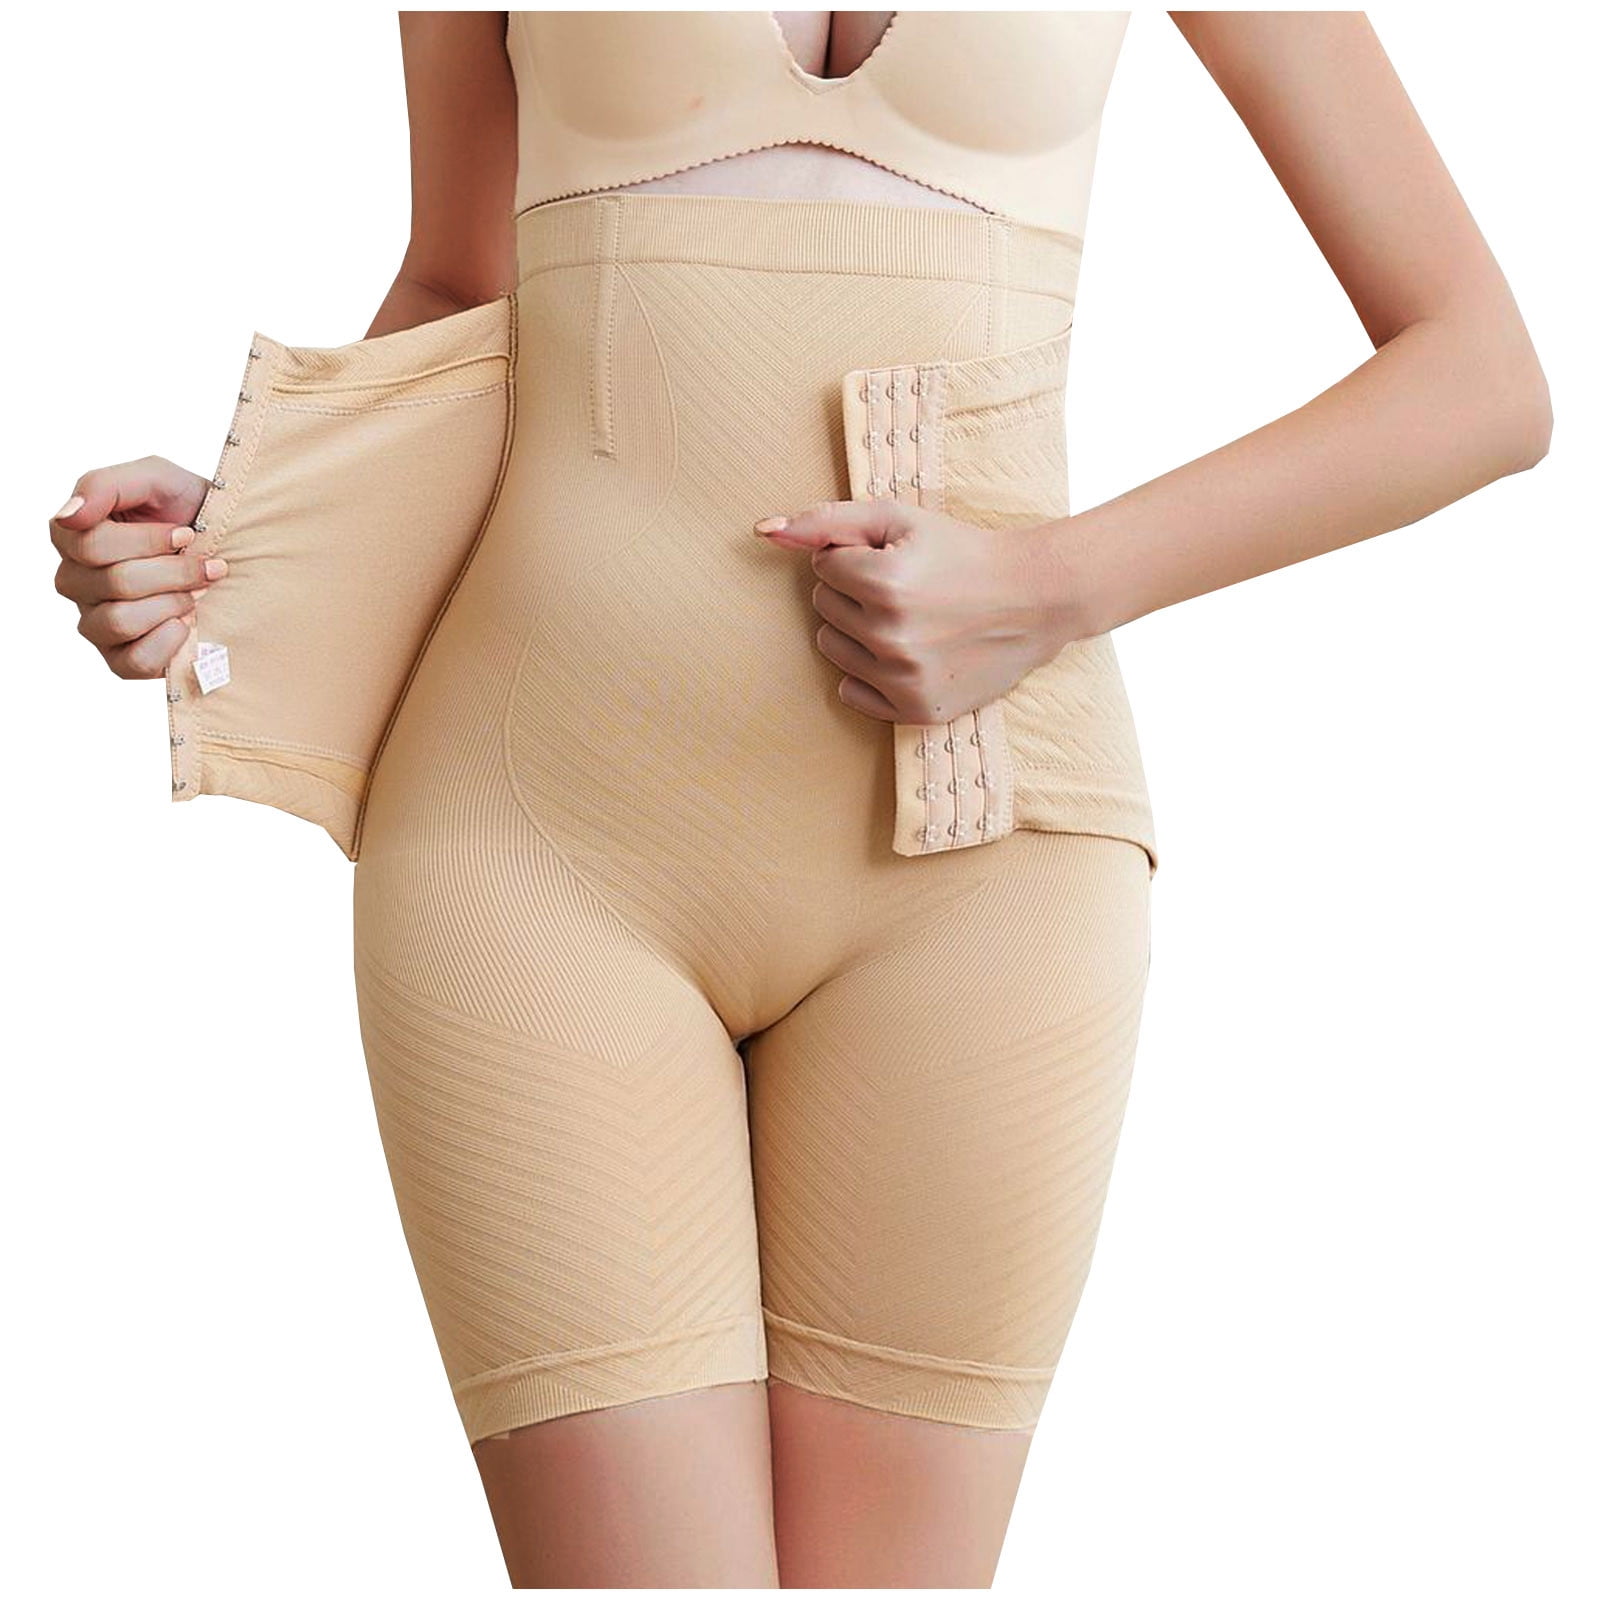 Halloween Costumes Old Fashioned with Corsets Tummy Control